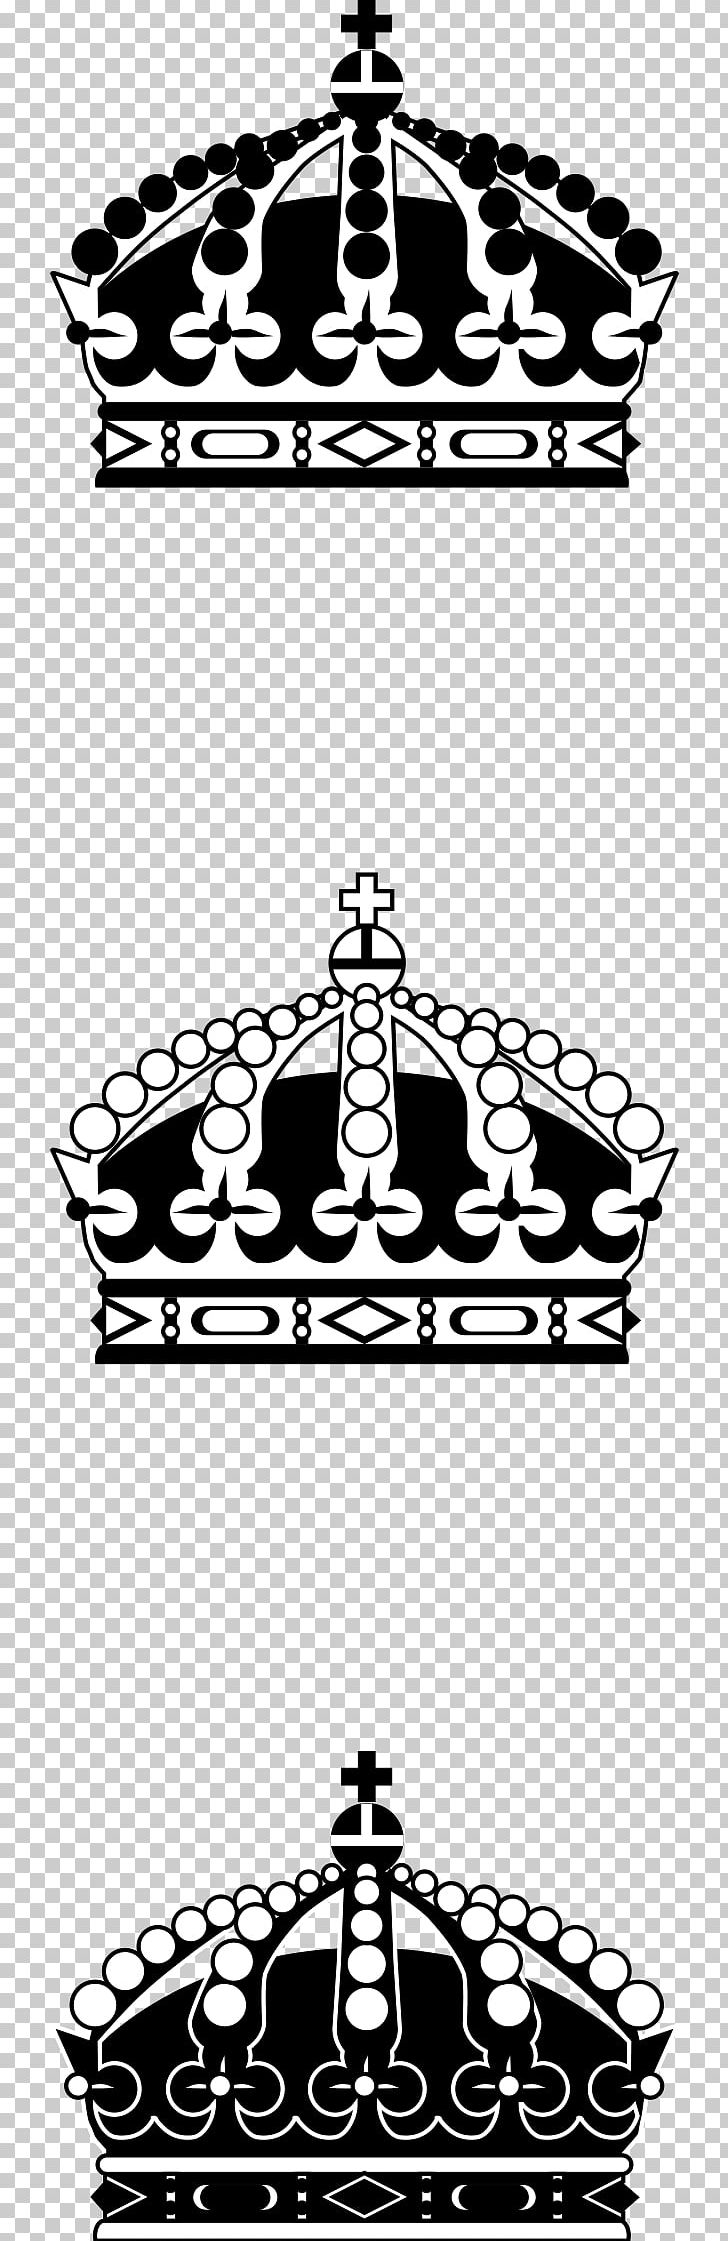 Black And White Crown PNG, Clipart, Area, Black, Cartoon Crown, Crown, Crowns Free PNG Download